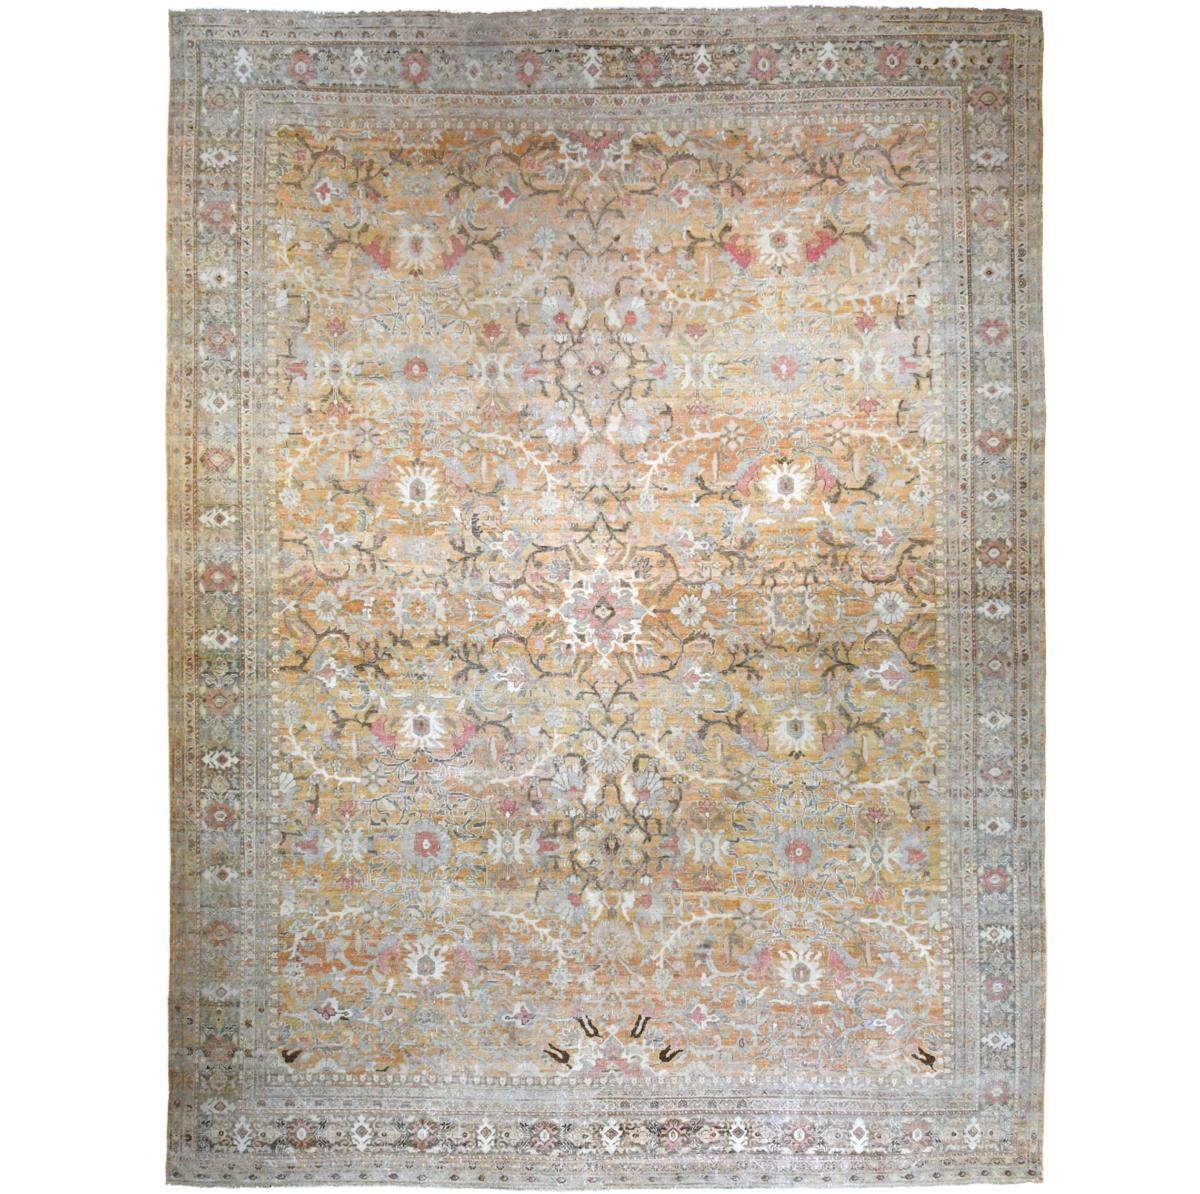 Antique Persian Sultanabad Mahal Rug 12’8 x 17′ In Good Condition For Sale In Sag Harbor, NY